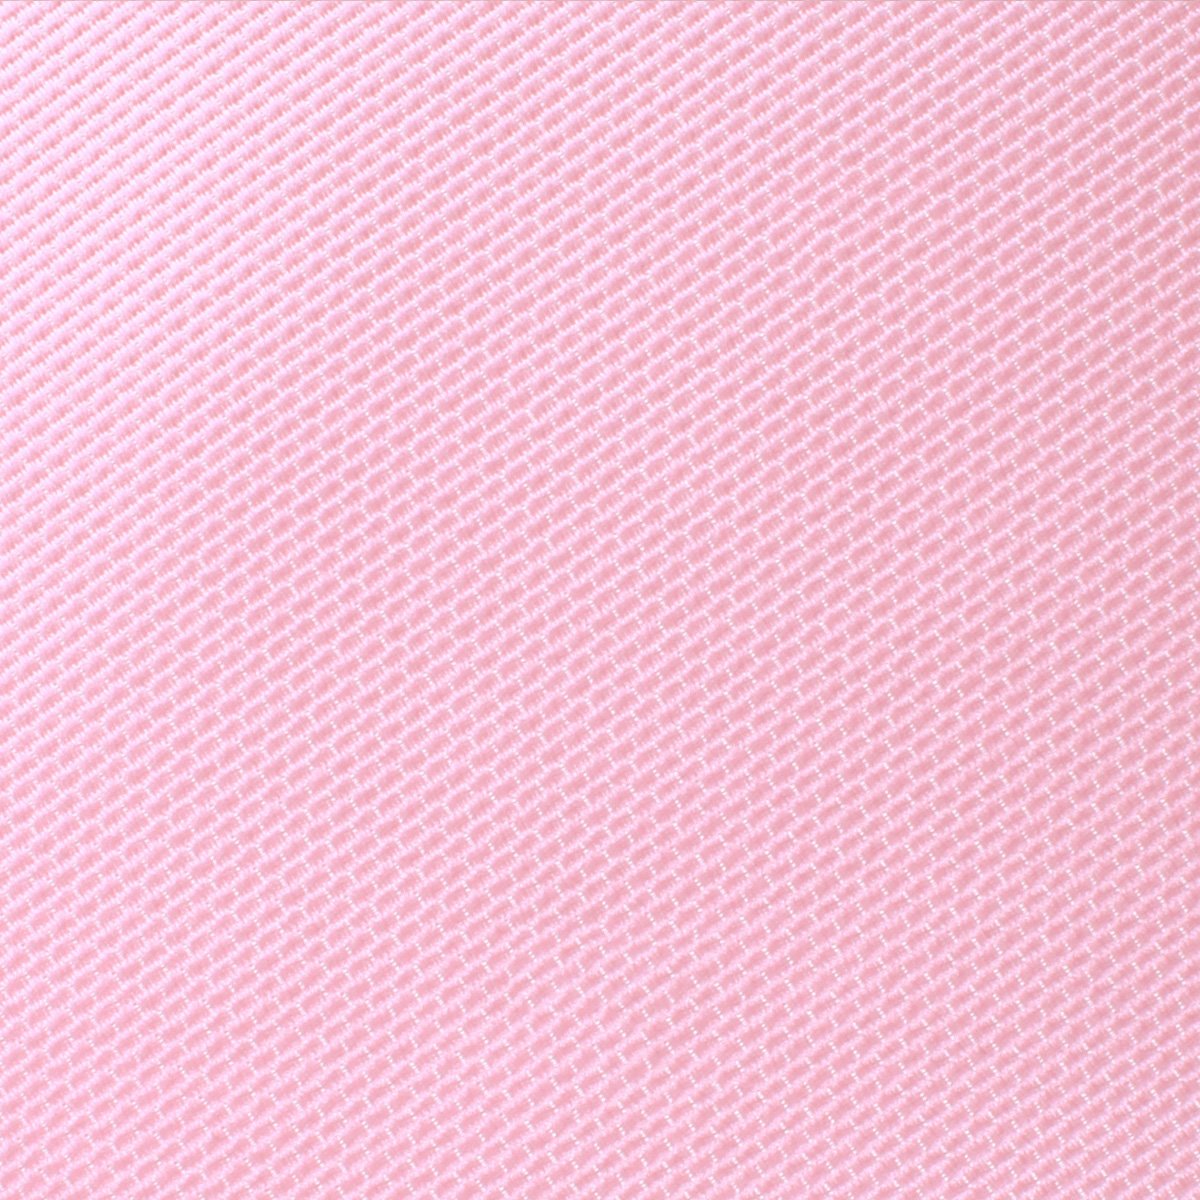 Tickled Pink Weave Fabric Swatch